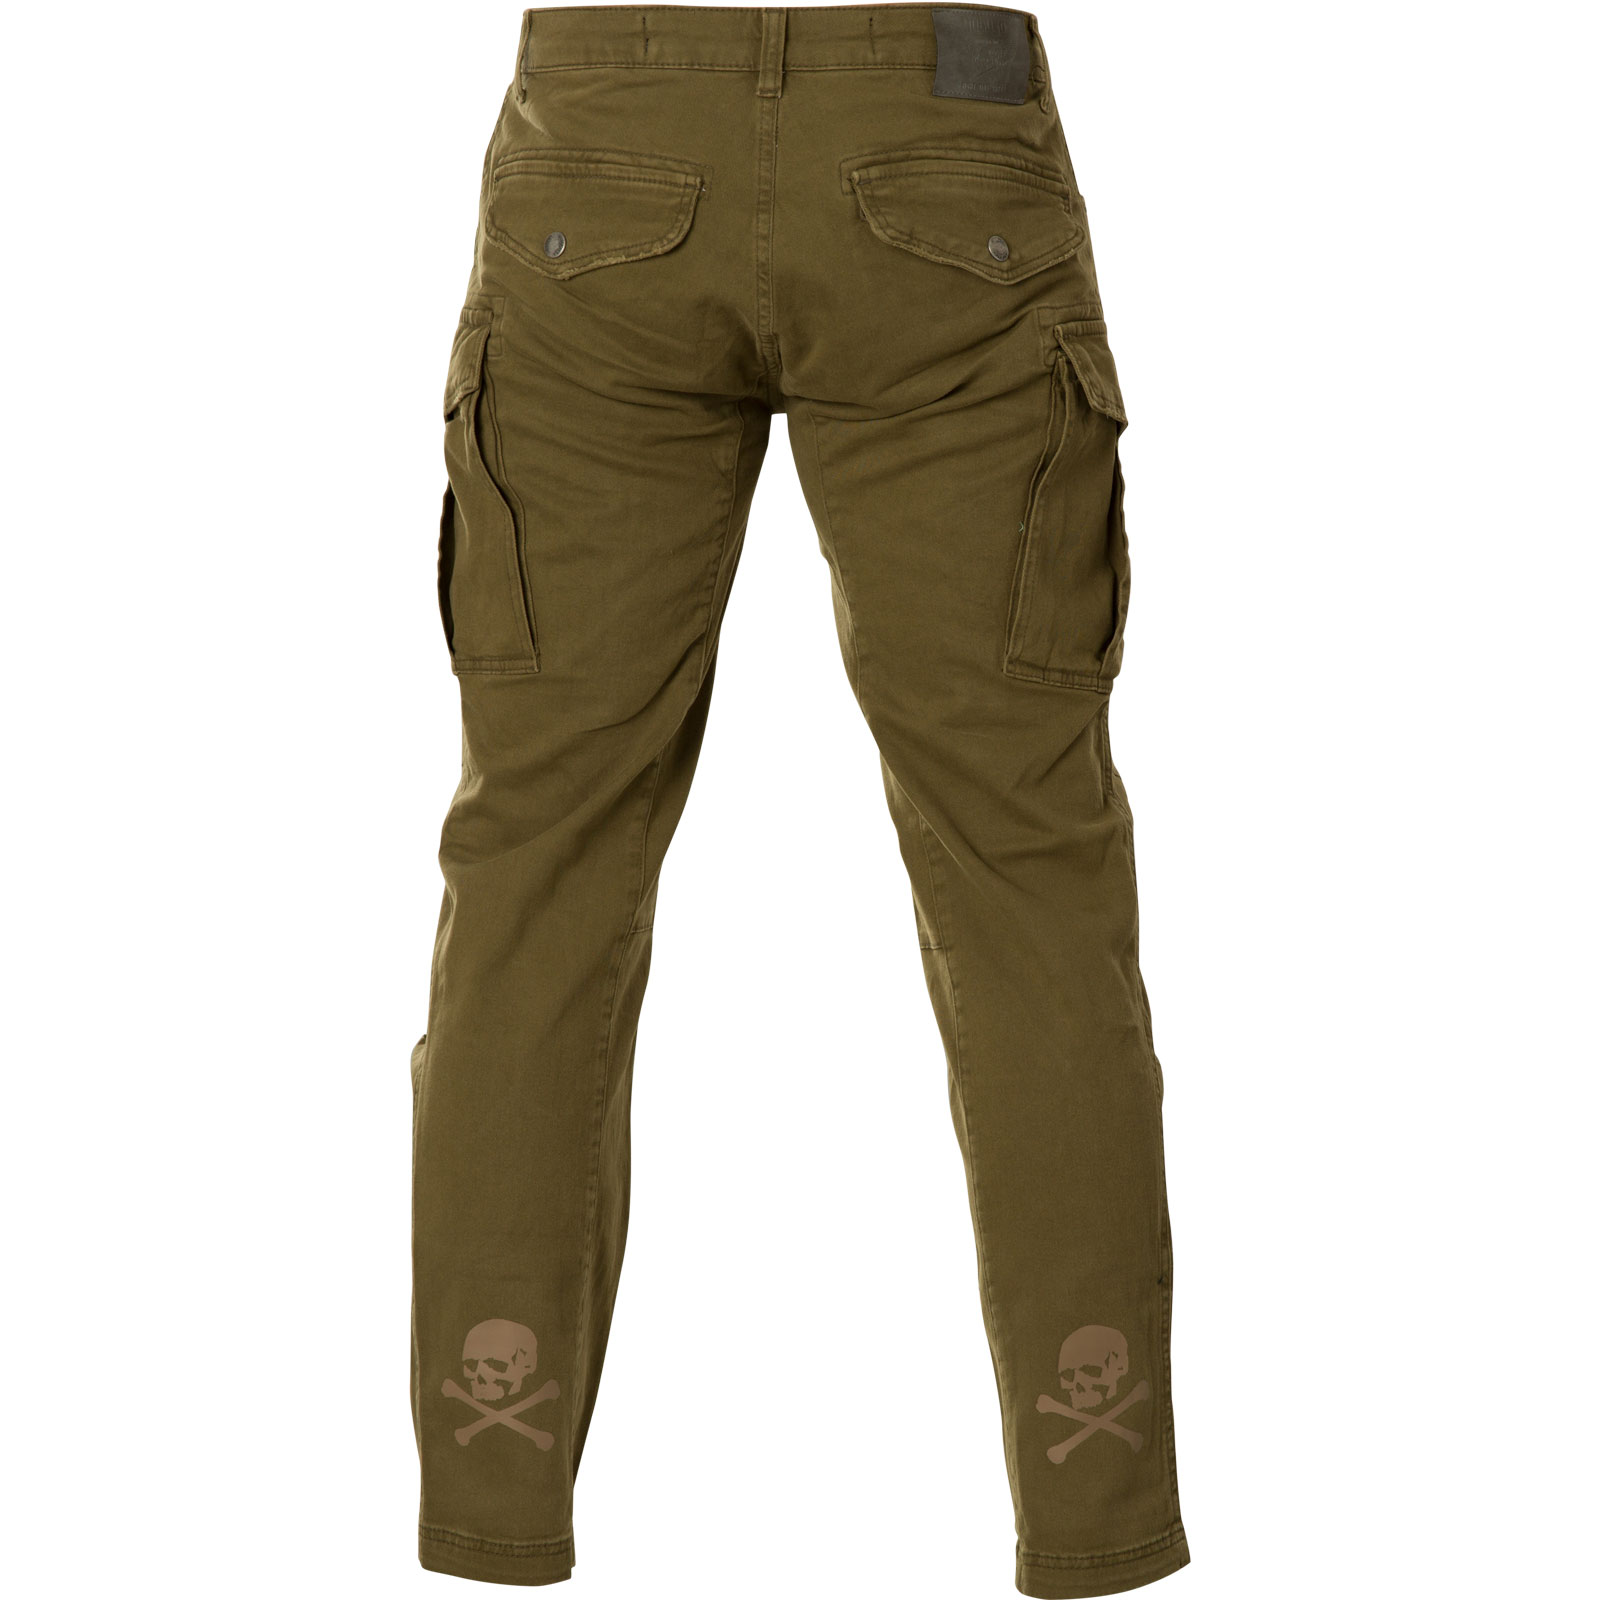 Yakuza Core Cargo Pants CPB-15010 in olive with a small prints